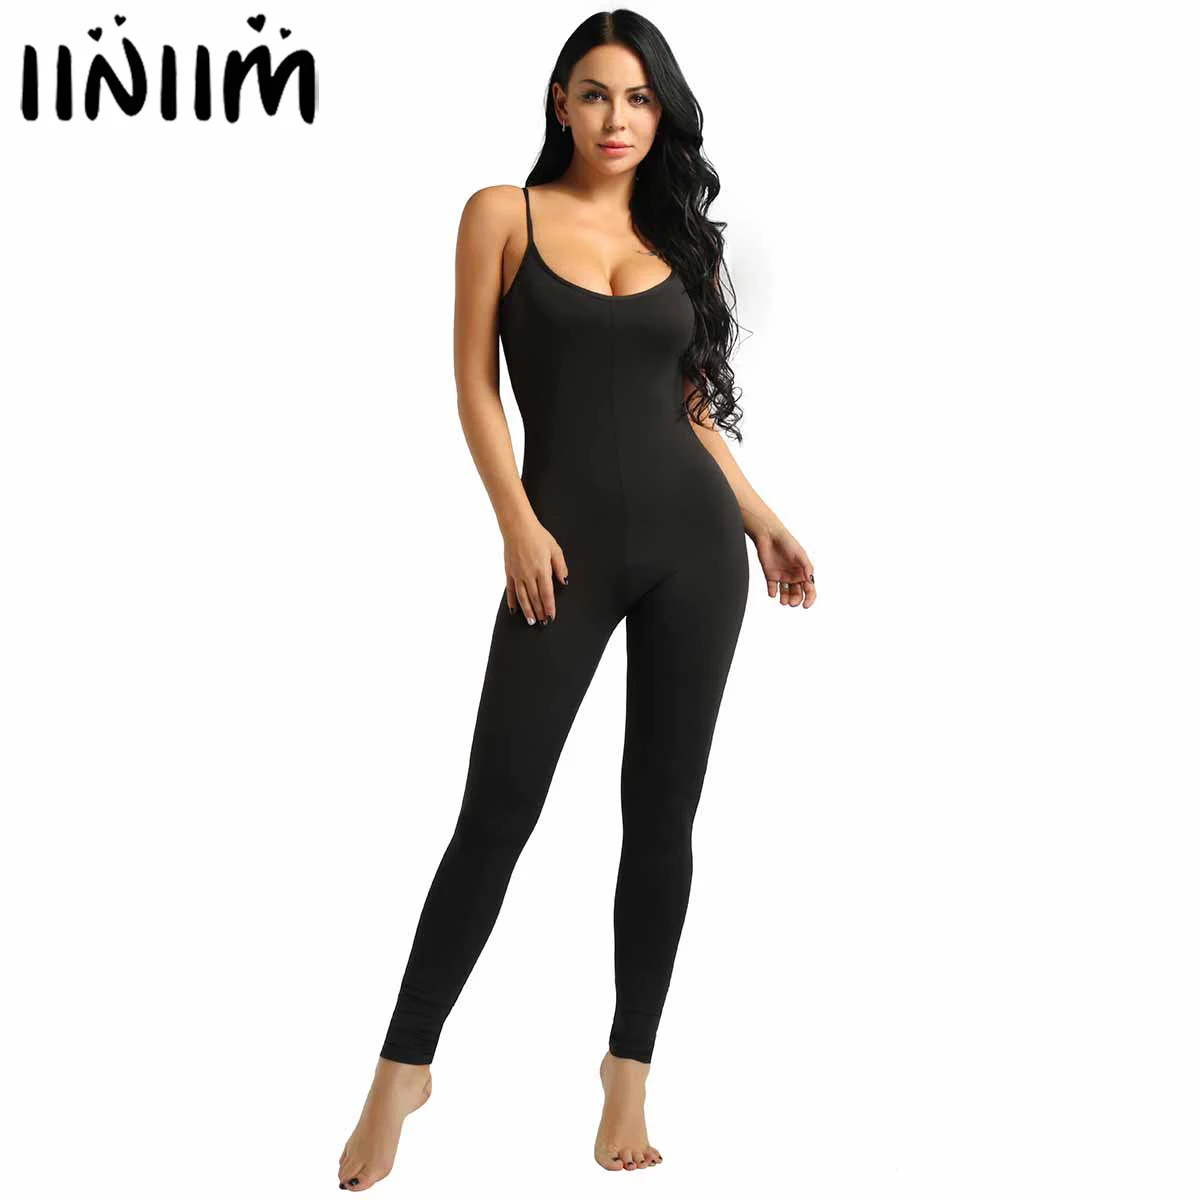 

Women Adult One-piece Playsuits Spaghetti Strapped Footless Stretchy Solid Tank Unitard Dancewear Leotard Bodysuit Jumpsuit